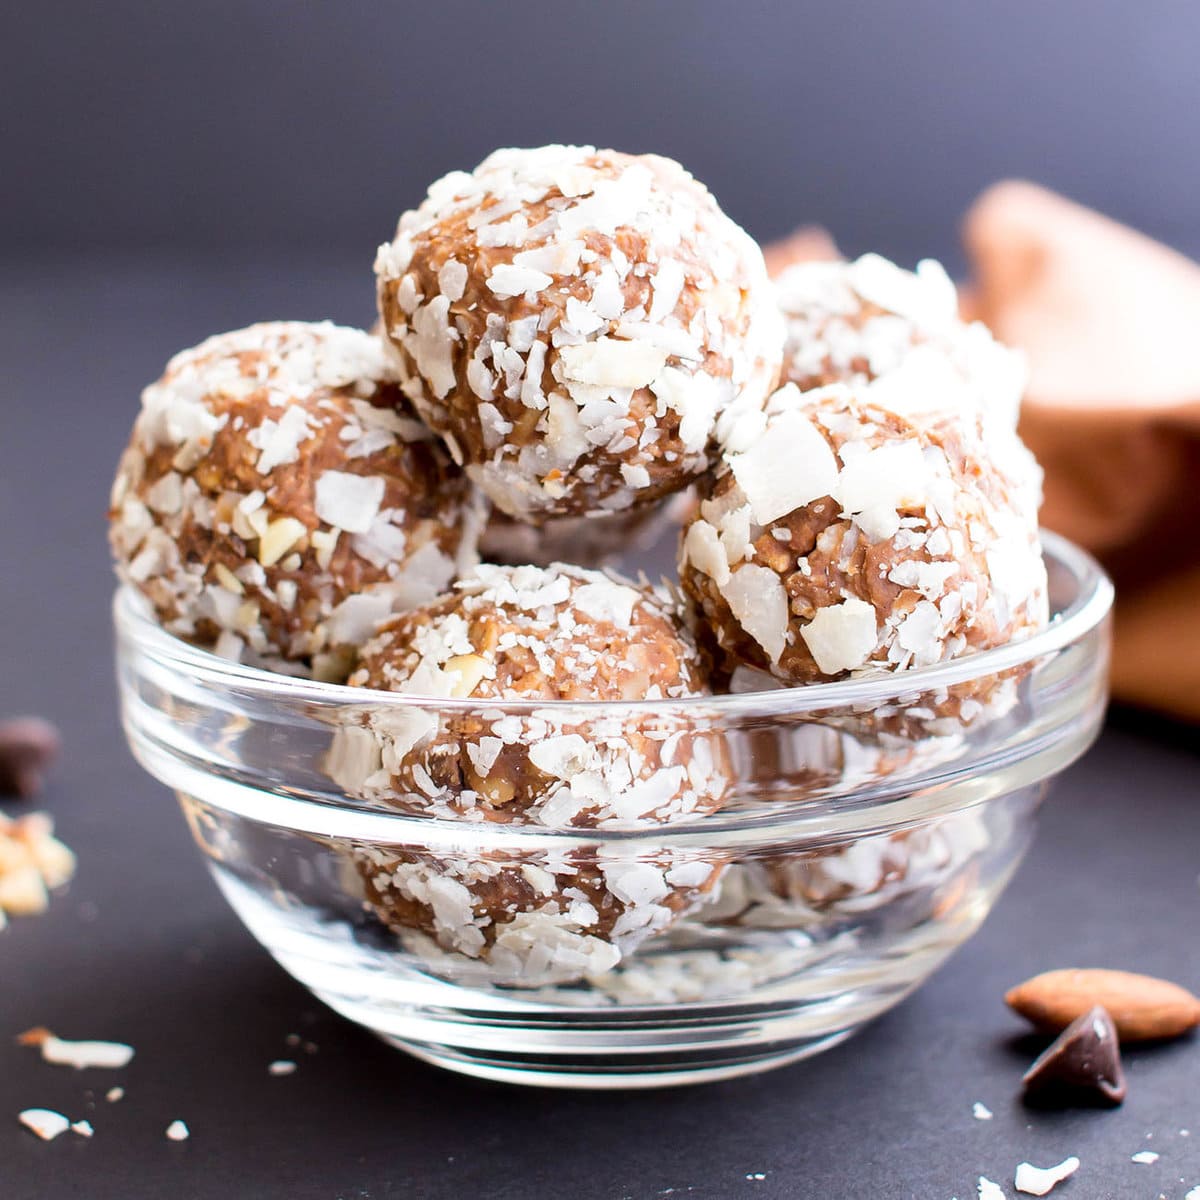 Glass bowl filled with no bake snacks with coconut, almonds, and chocolate chips